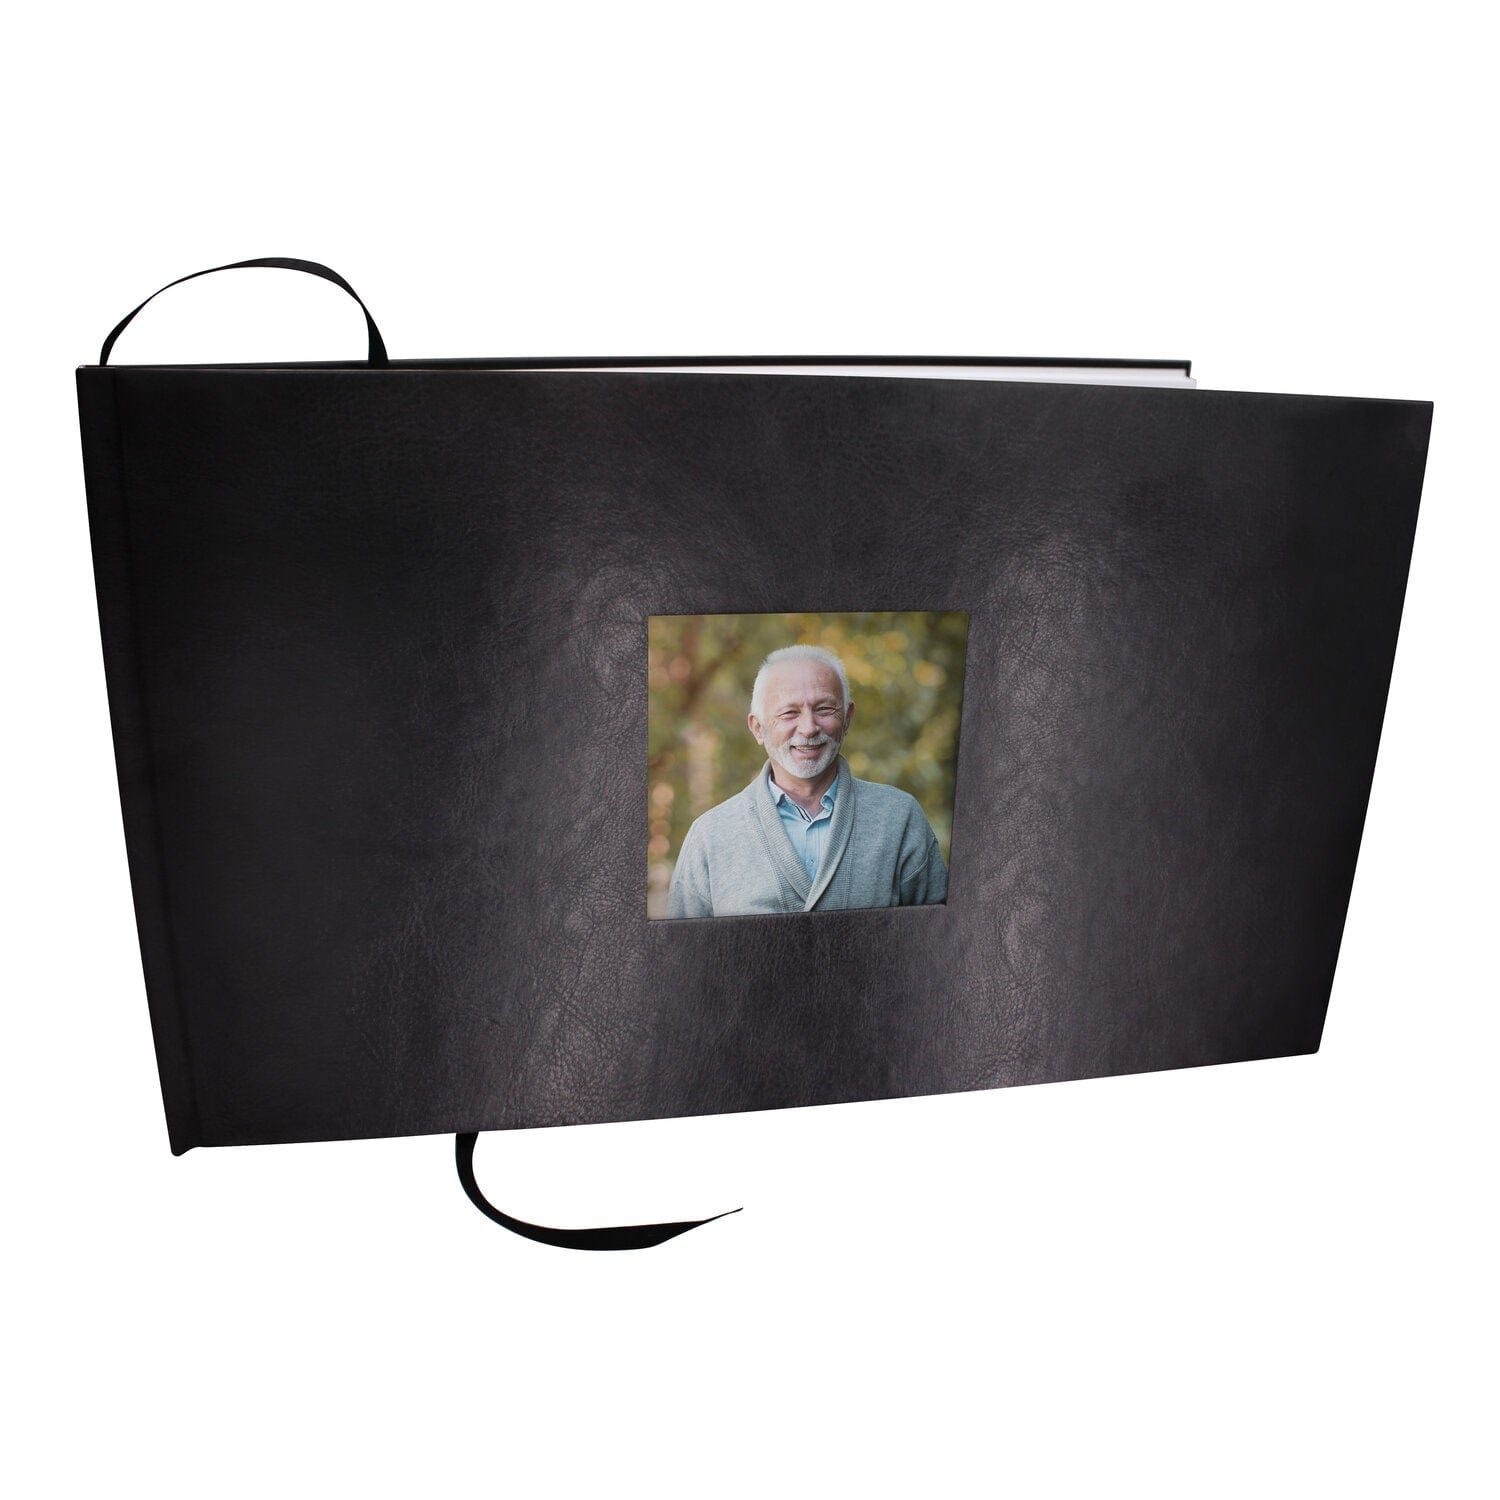 Commemorative Cremation Urns Home & Garden Black Textured Guest Book for Funeral or Memorial Service